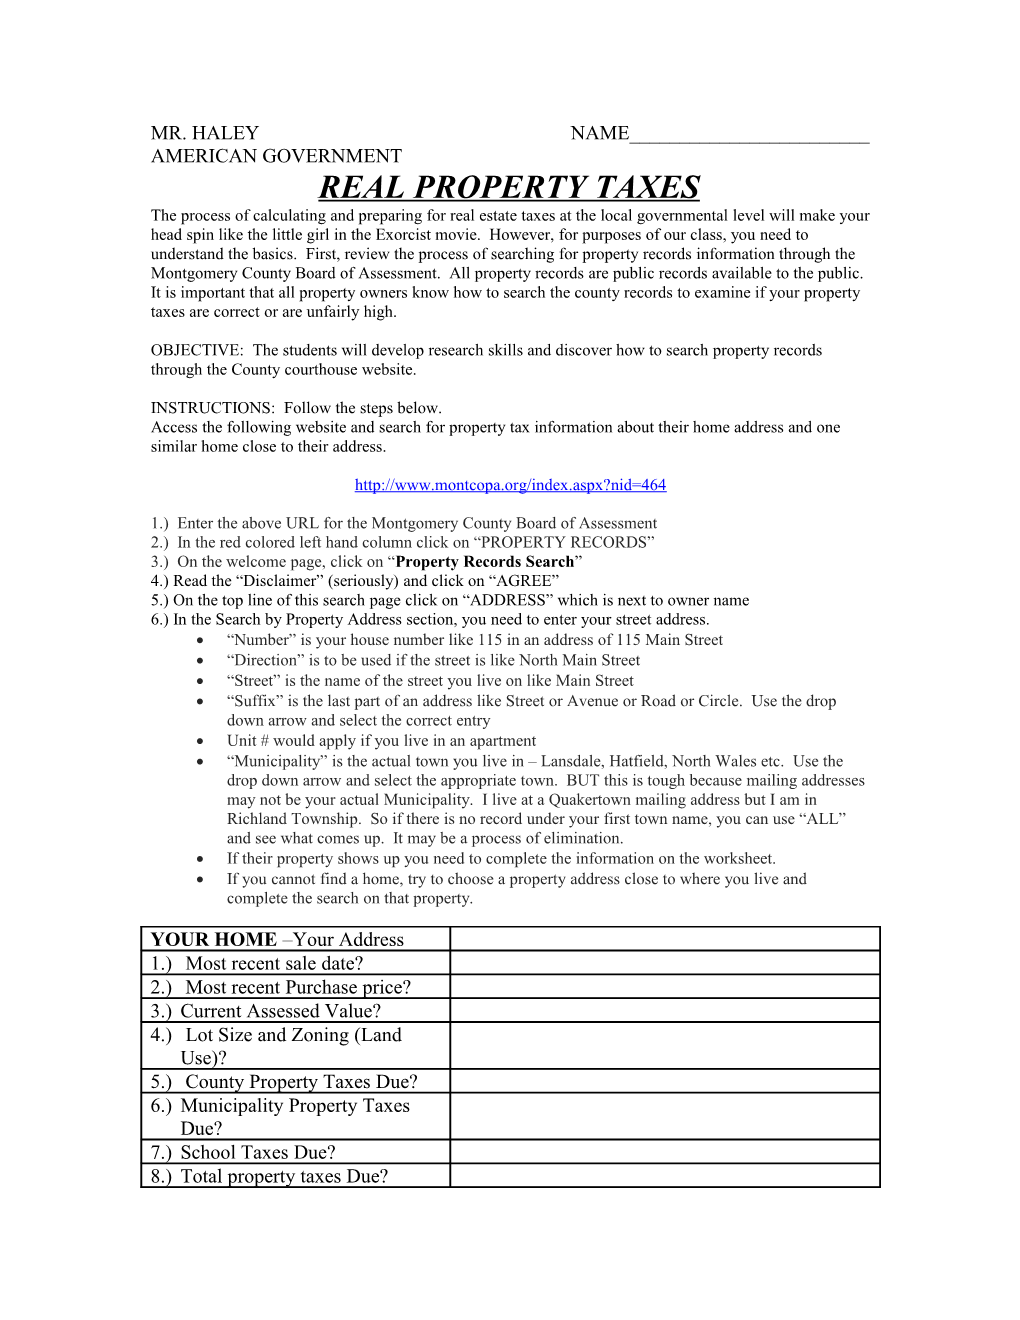 Real Property Taxes